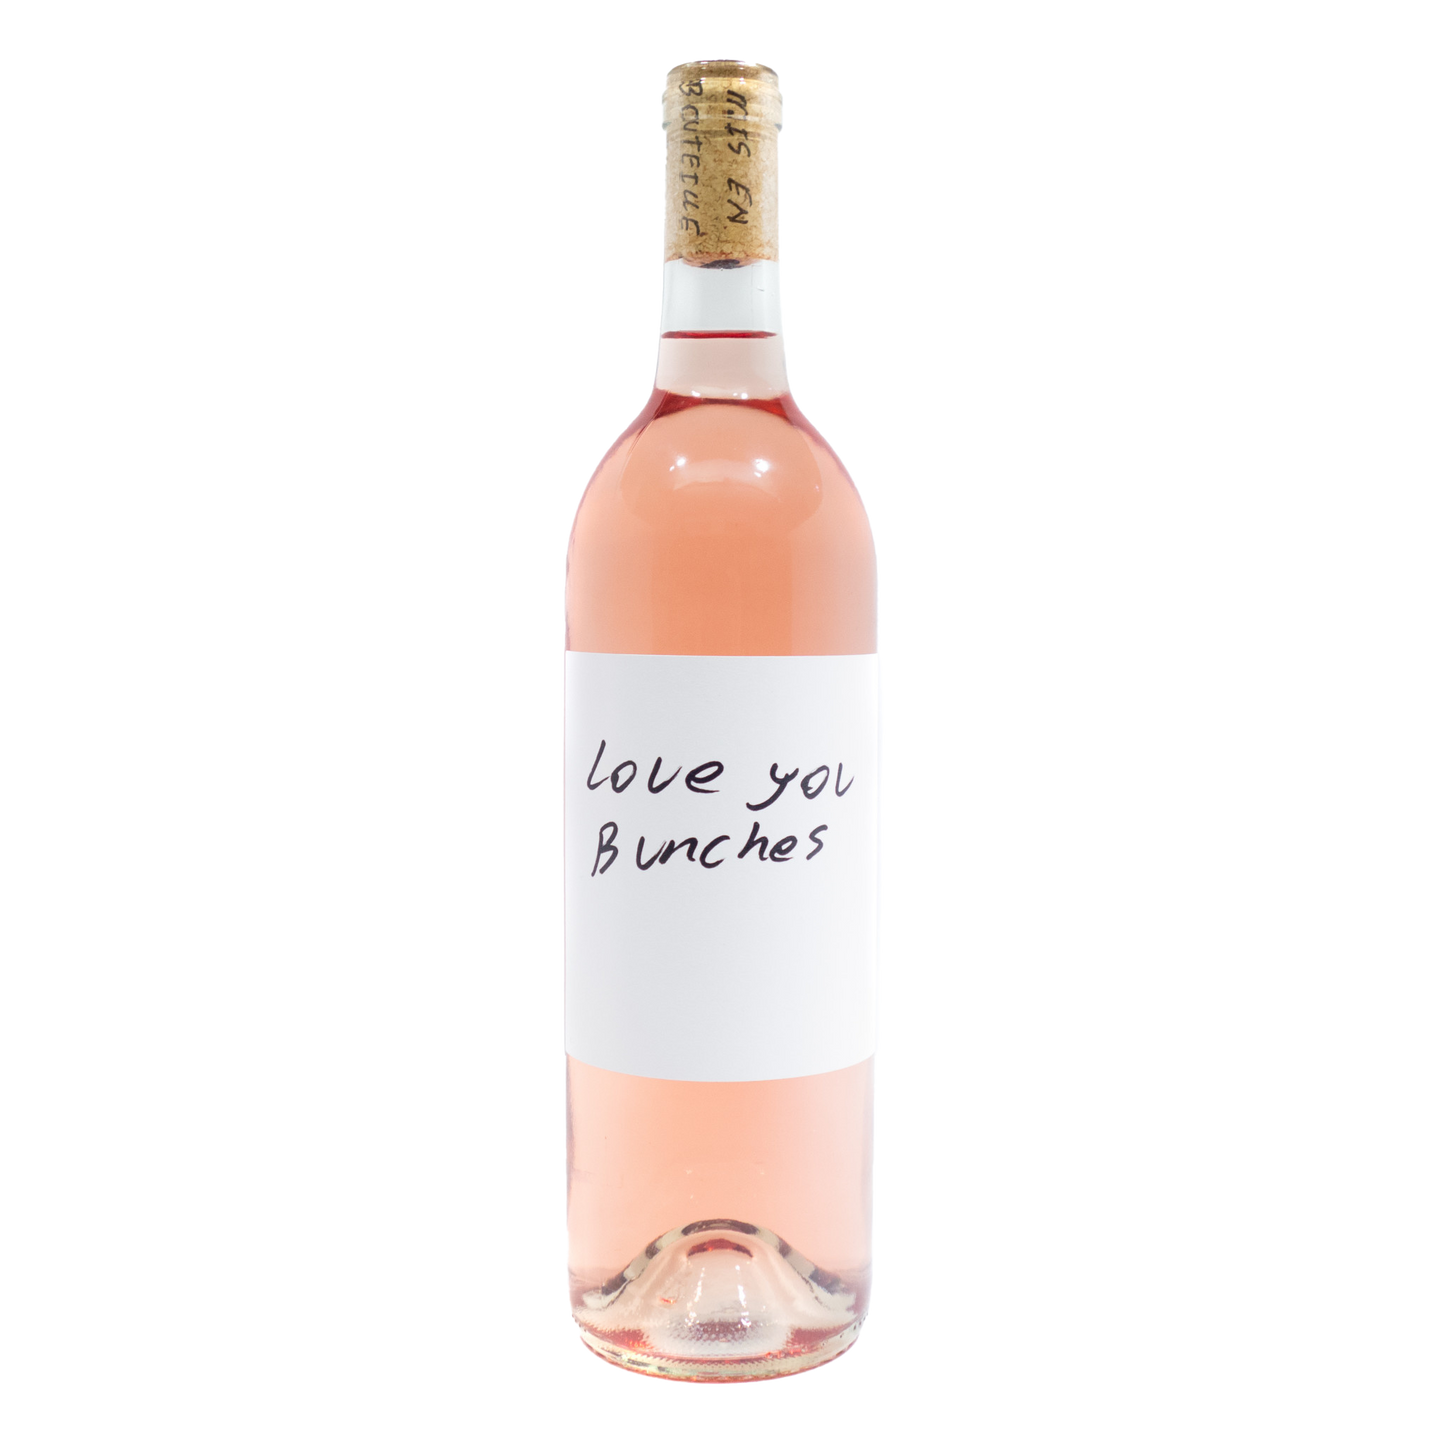 A bottle of Love You Bunches 2021 Rose